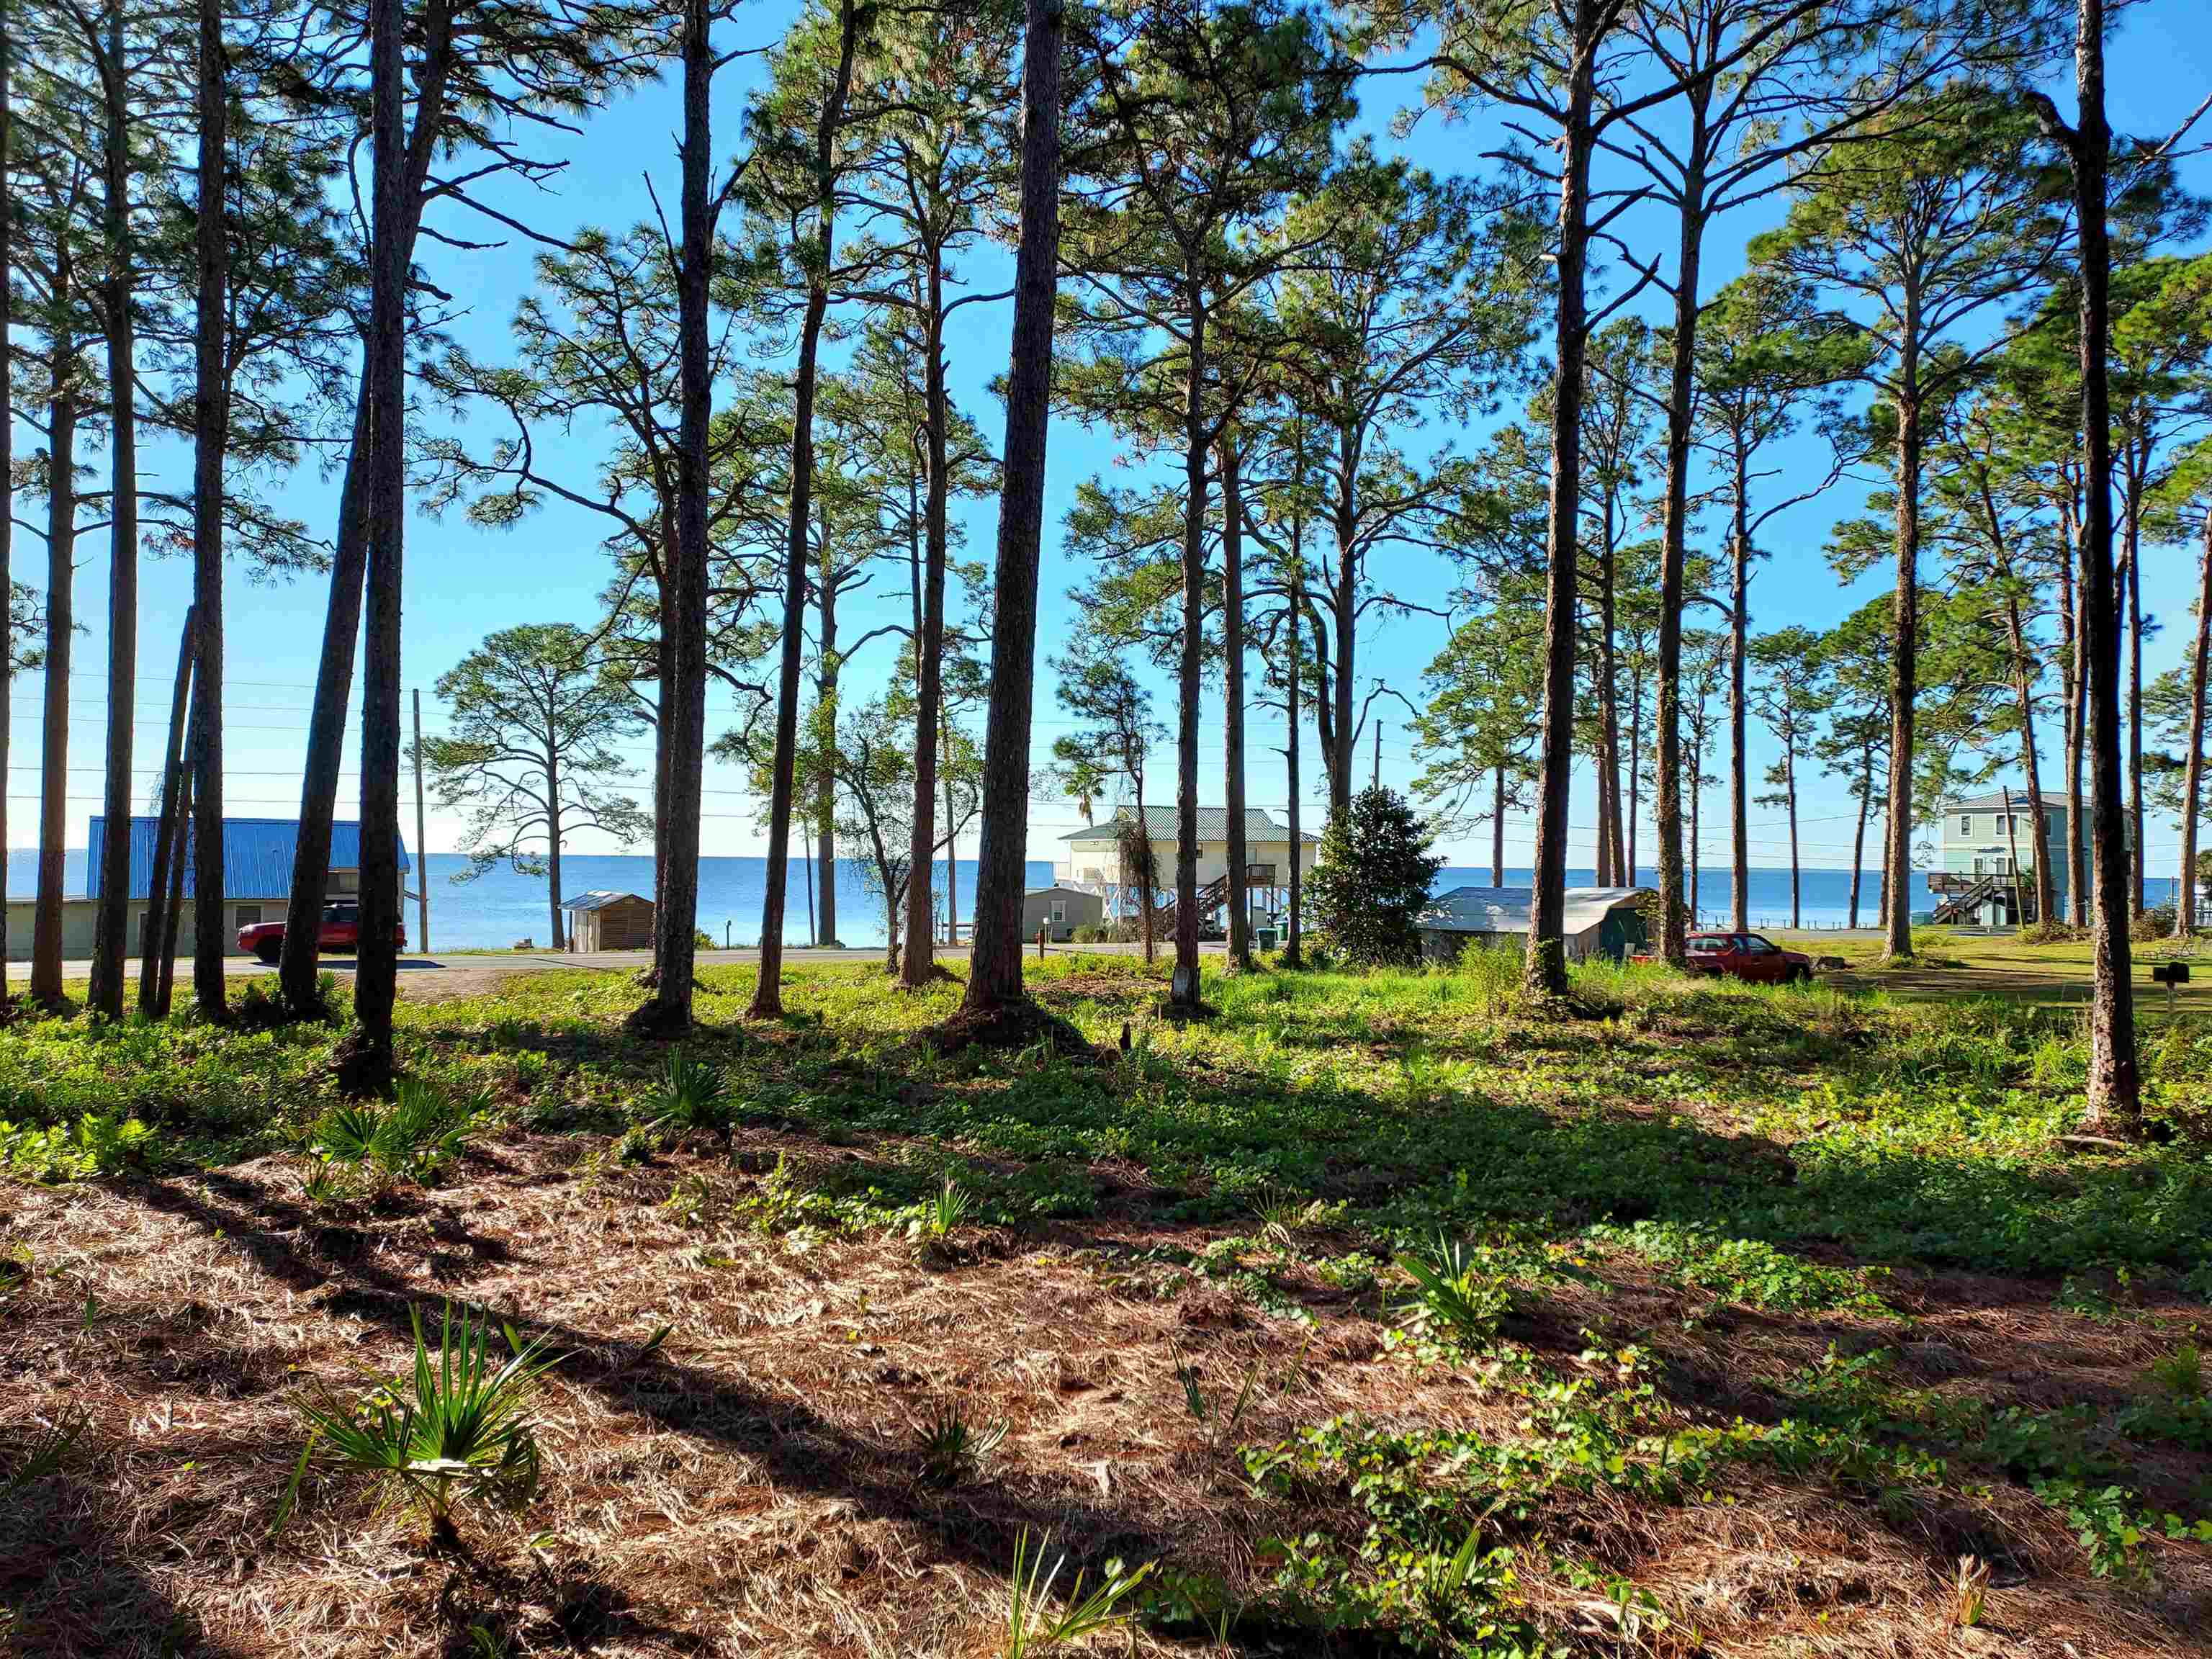 This beautiful high and dry X Flood Zone lot in St James, overlooking the Gulf of Mexico is just right for your Forgotten Coast home.  Over 1/2 acre located in the St James area between Summer Camp Beach and St James Bay Golf Club. This high lot has been forest mulched and a new "state permitted" culvert has been installed. Come build and enjoy your "Forever".